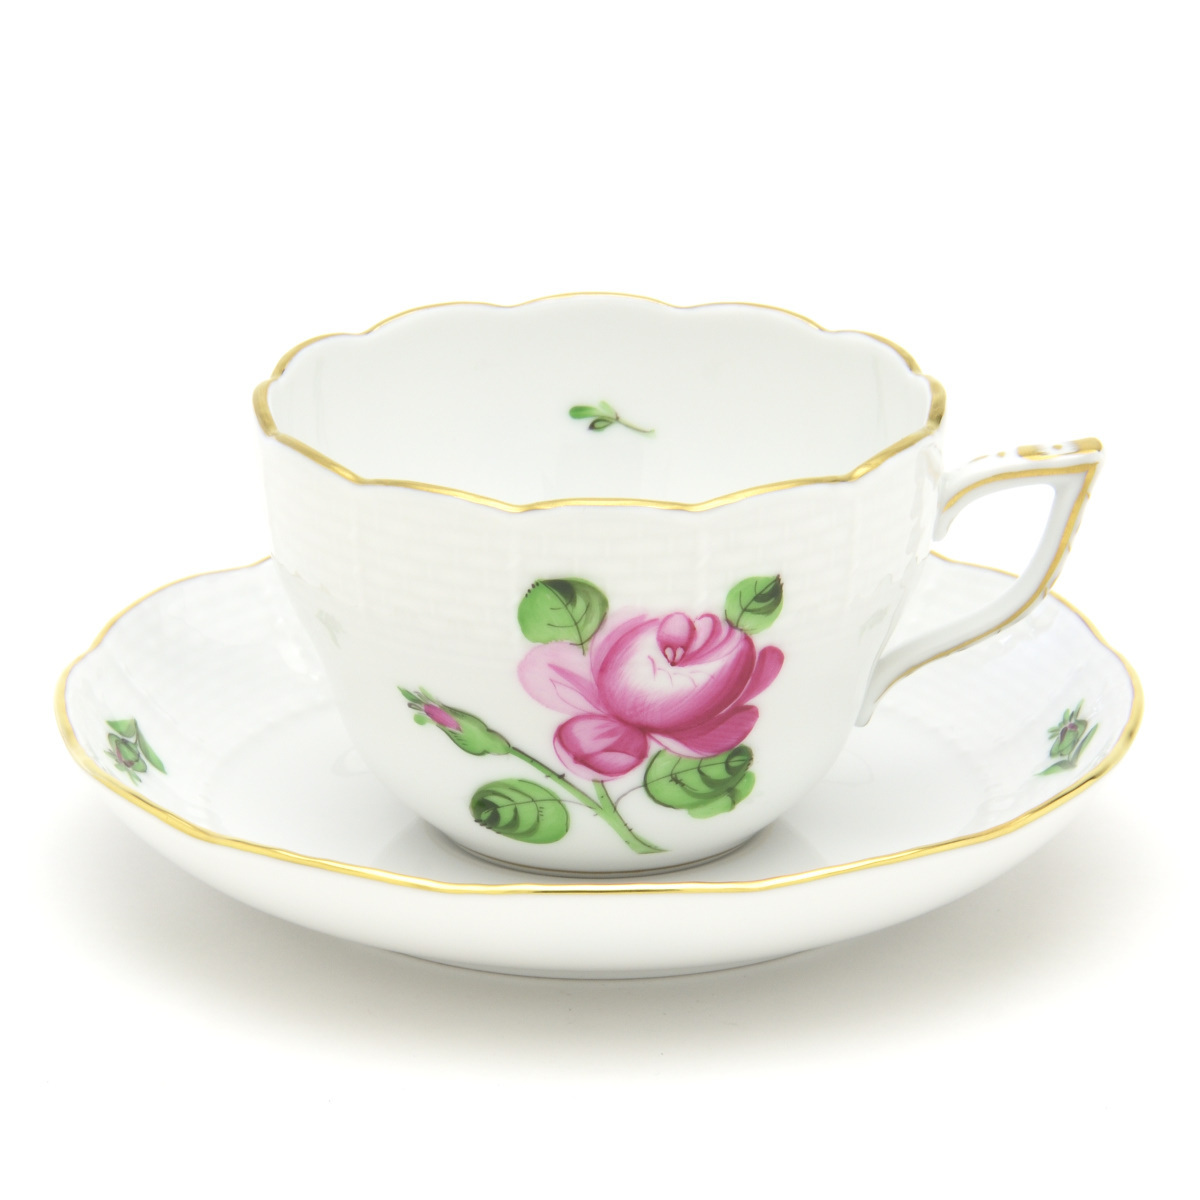 Herend Dual-purpose cup and saucer Rose and bud Hand-painted Porcelain Western tableware Coffee/Tea cup Tableware Made in Hungary New Herend, tea utensils, Cup and saucer, coffee, For both tea and tea